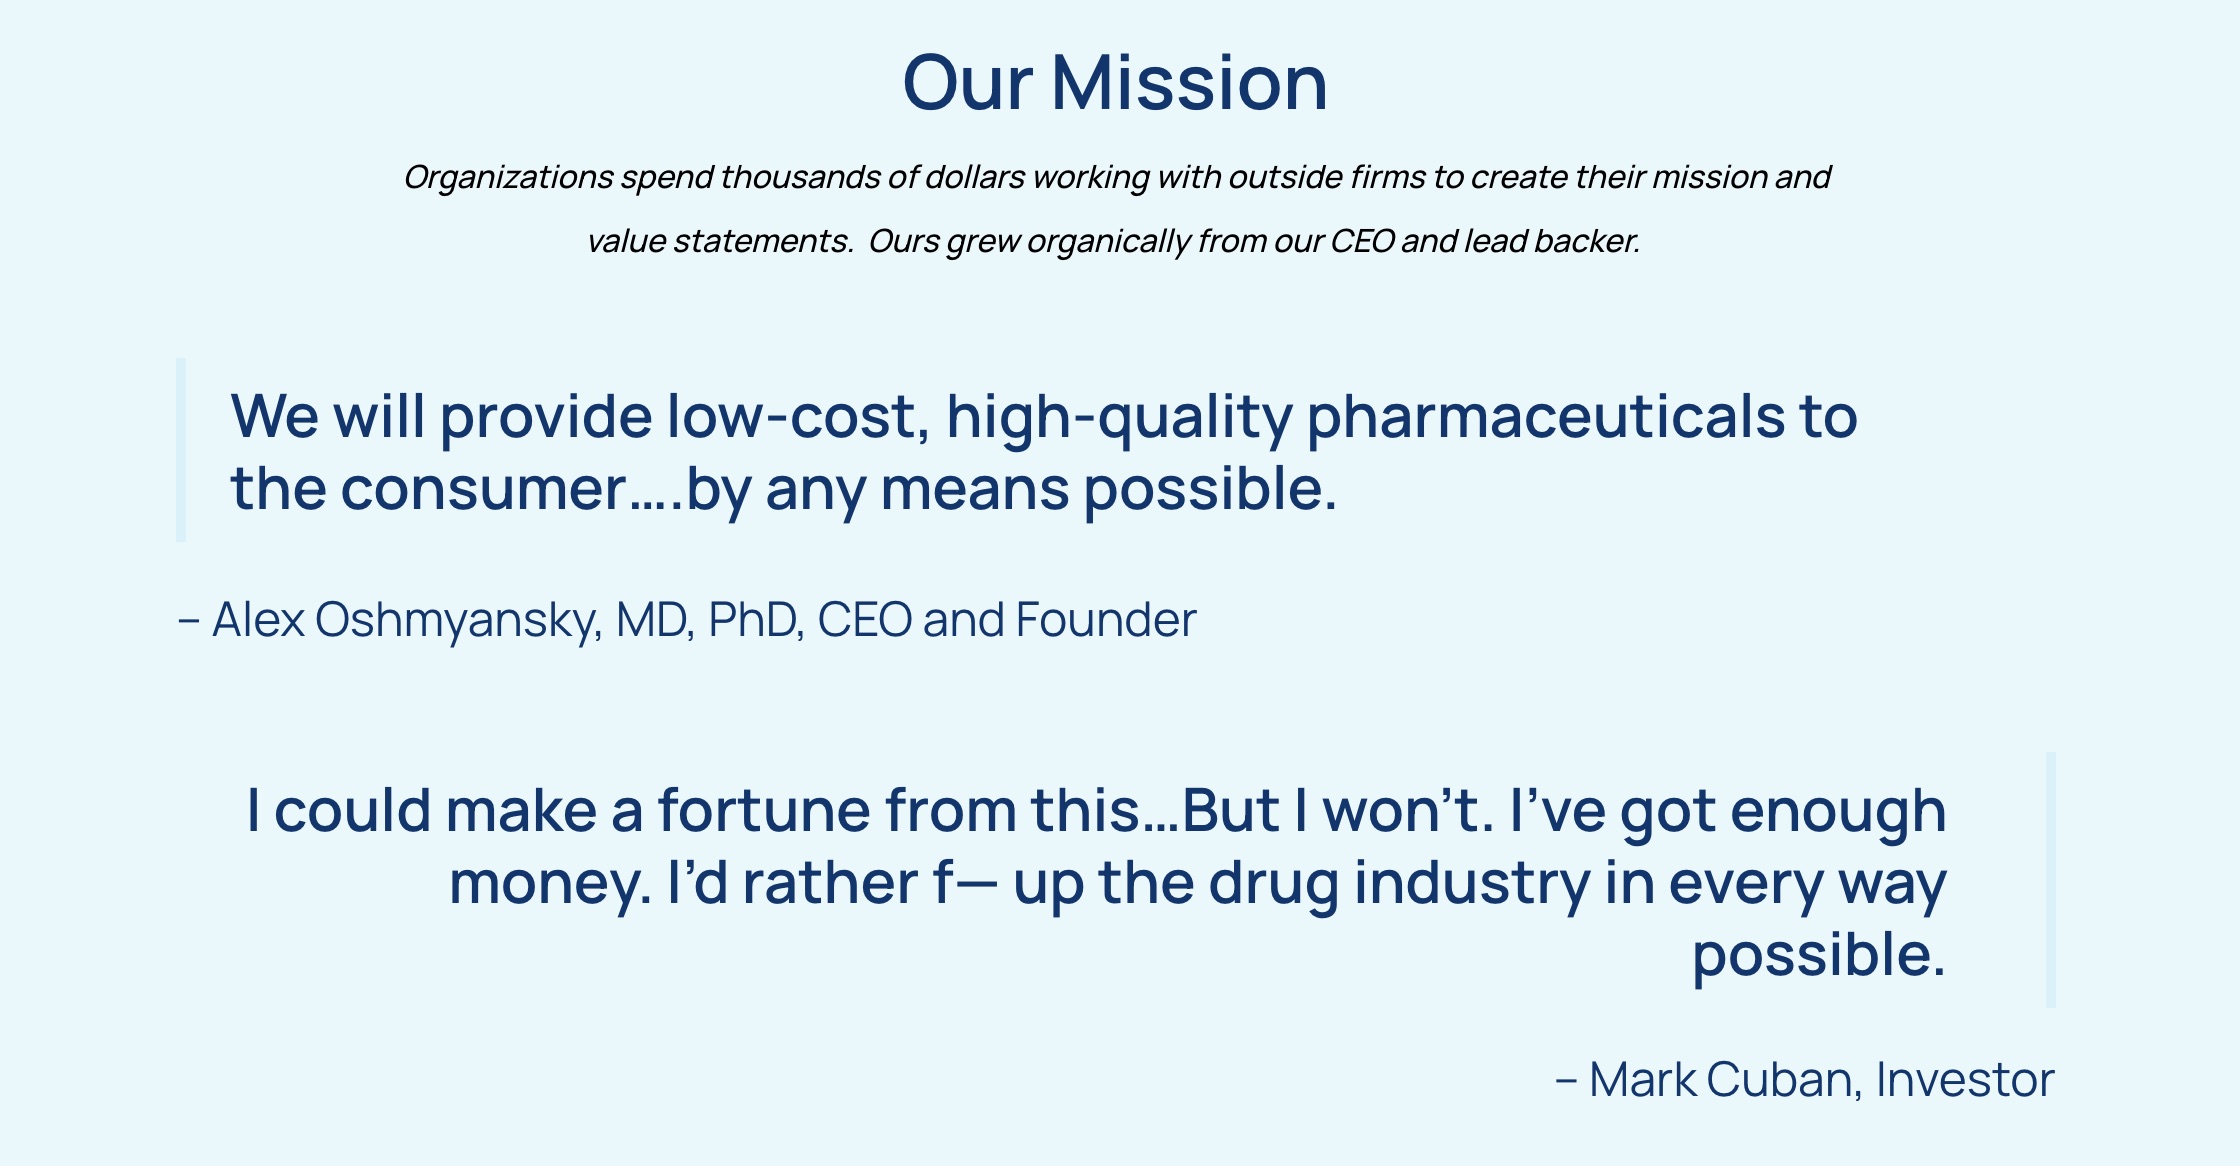 rather f up the drug industry mark cuban